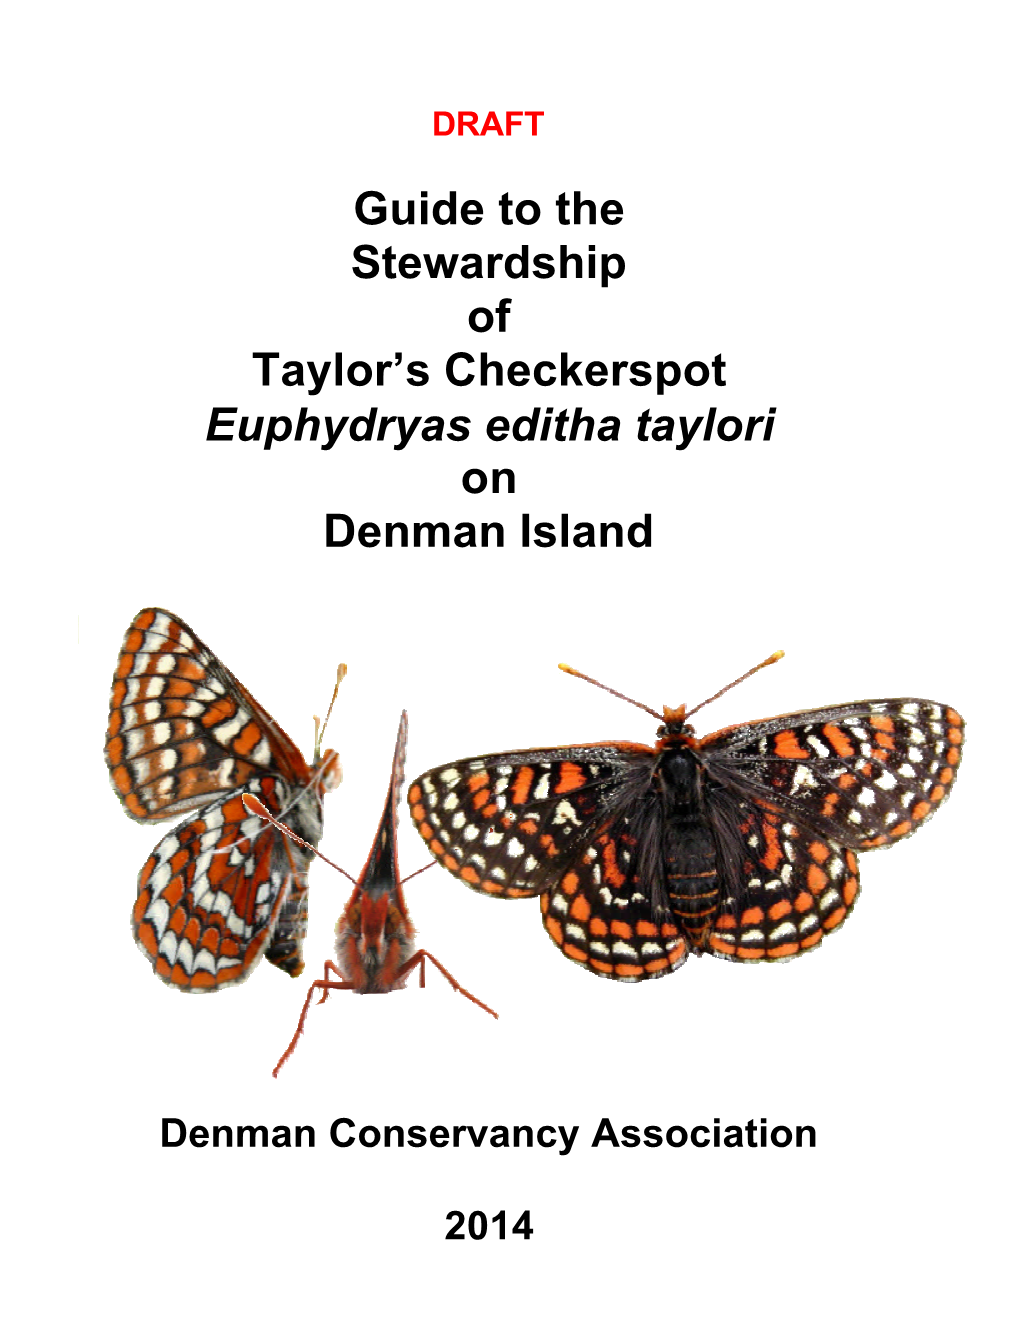 Guide to the Stewardship of Taylor's Checkerspot Euphydryas Editha